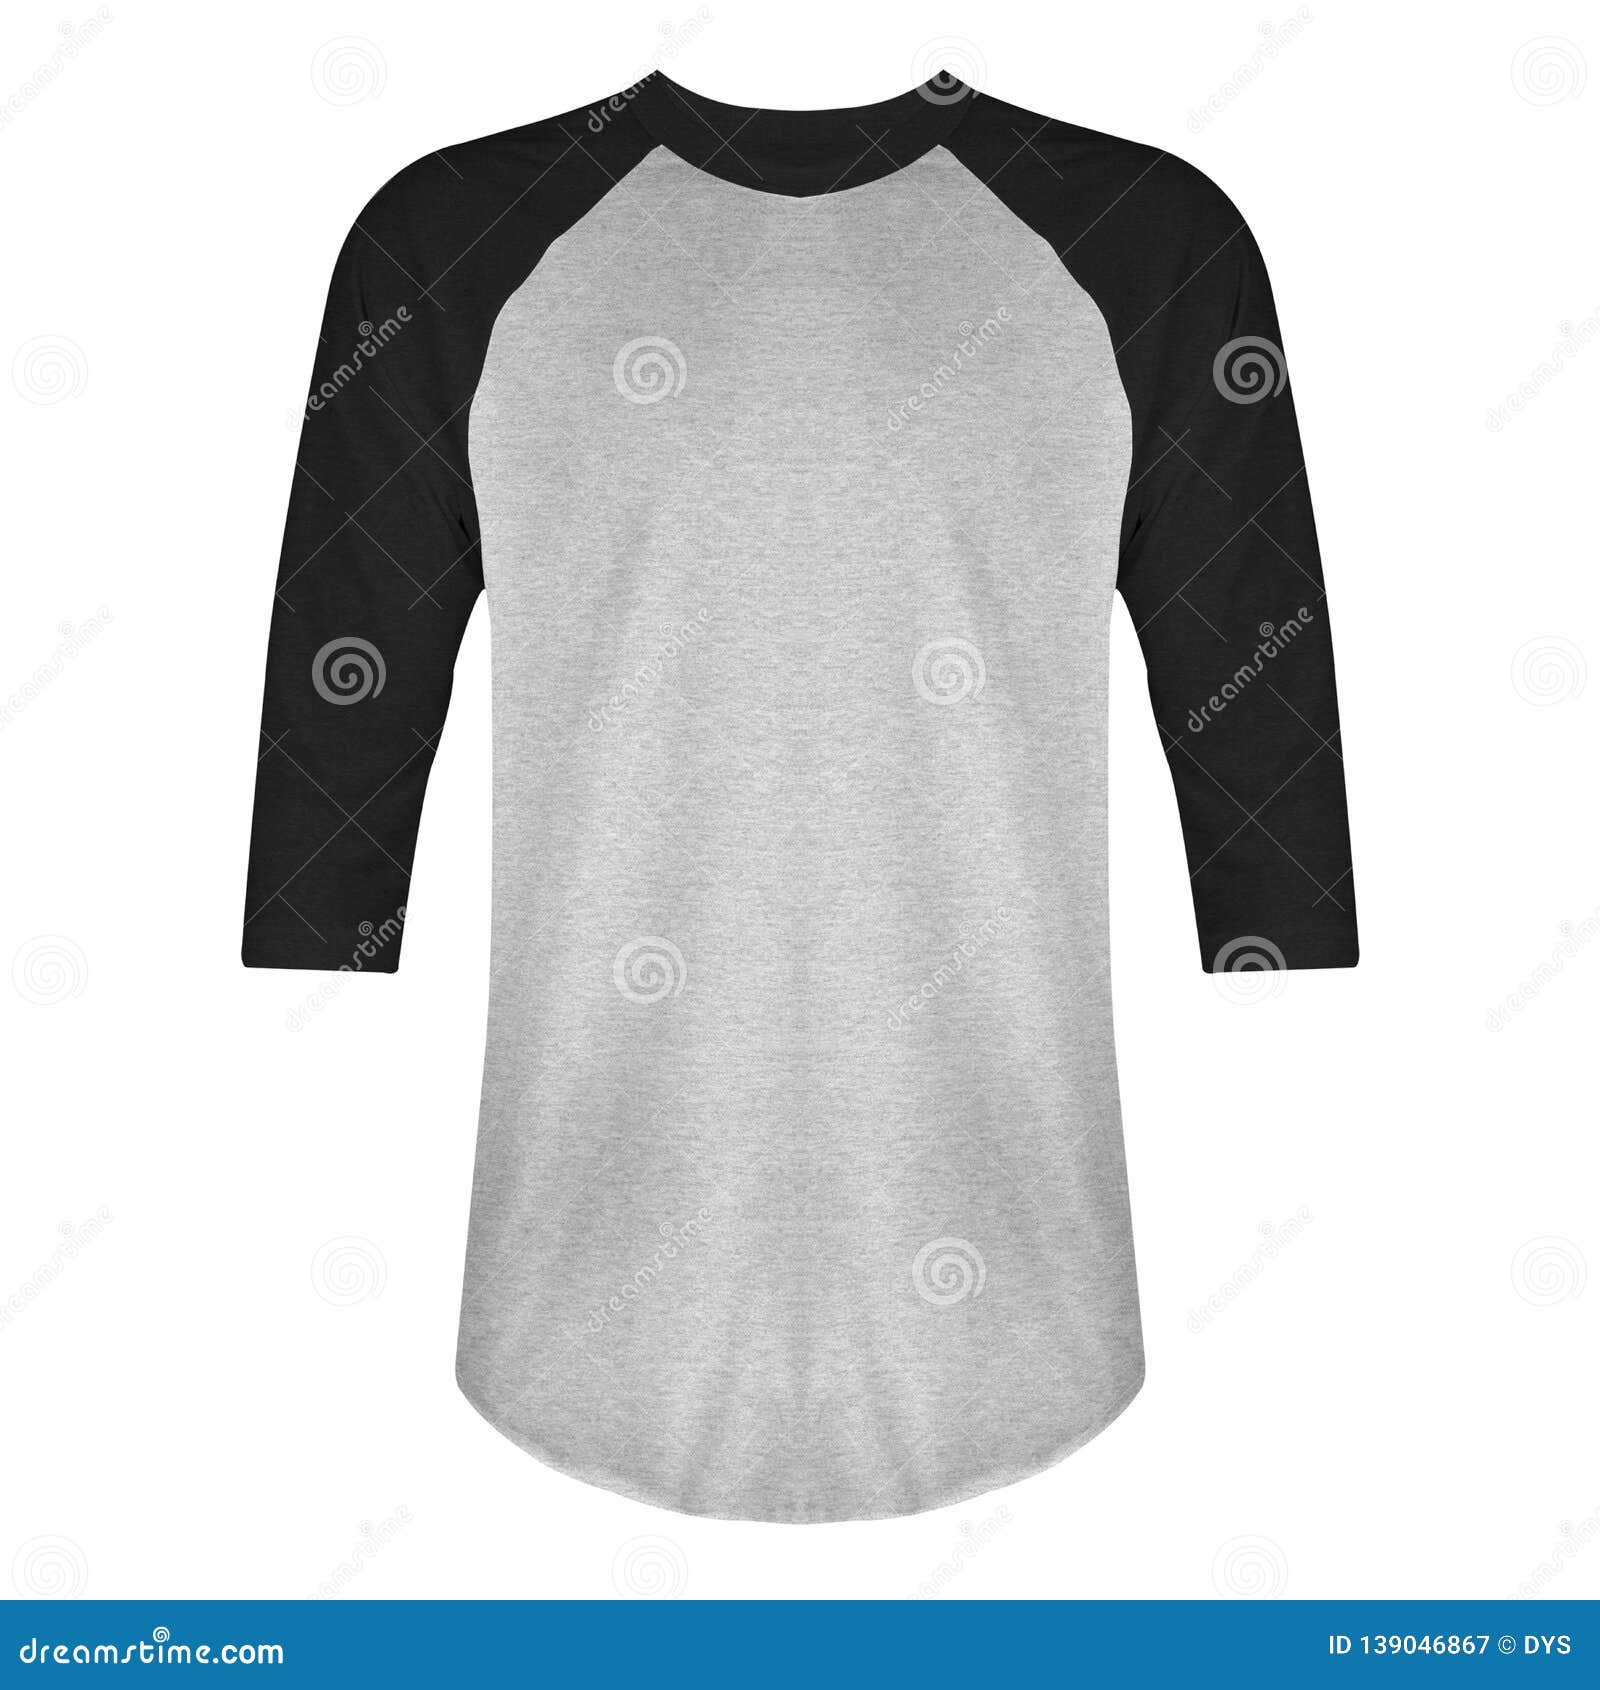 Download Blank T Shirt Raglan 3/4 Sleeves Front View With Black Heather Grey Color Isolated On White ...